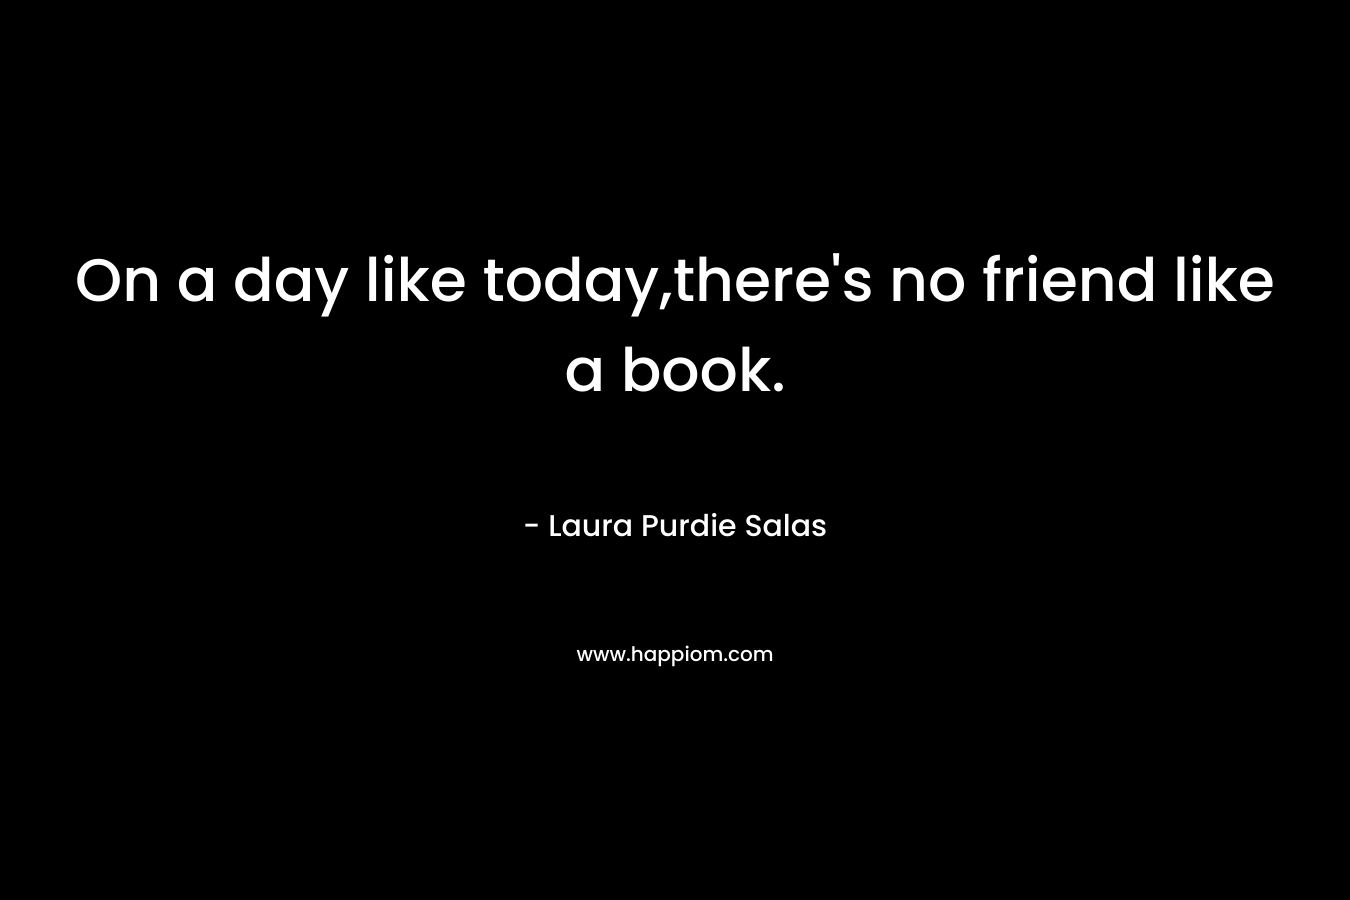 On a day like today,there’s no friend like a book. – Laura Purdie Salas